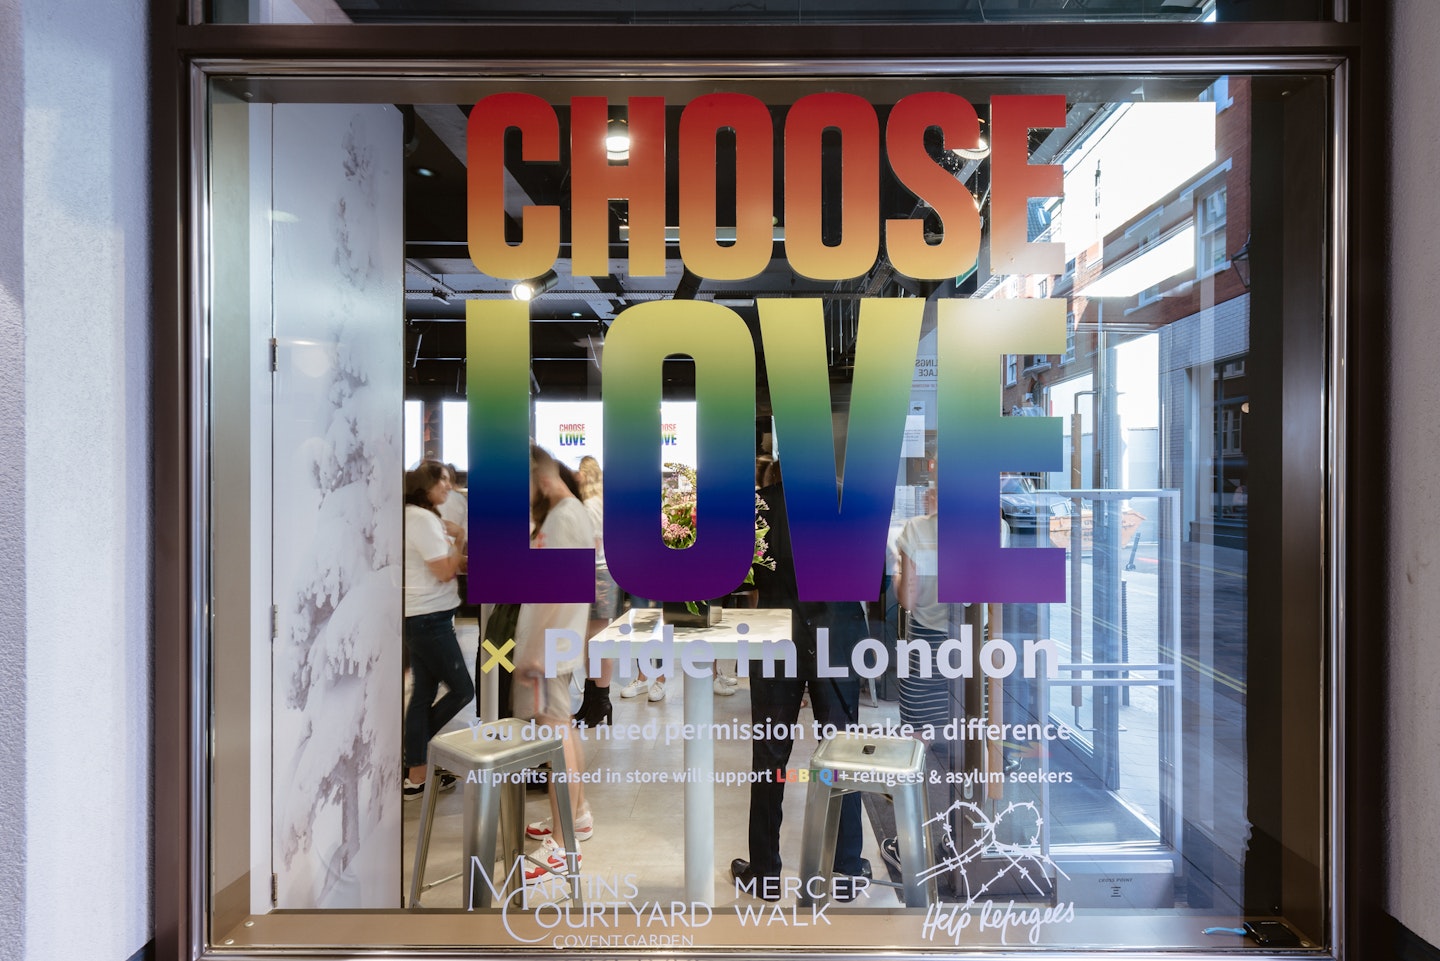 The Rainbow Choose Love pop-up store in London